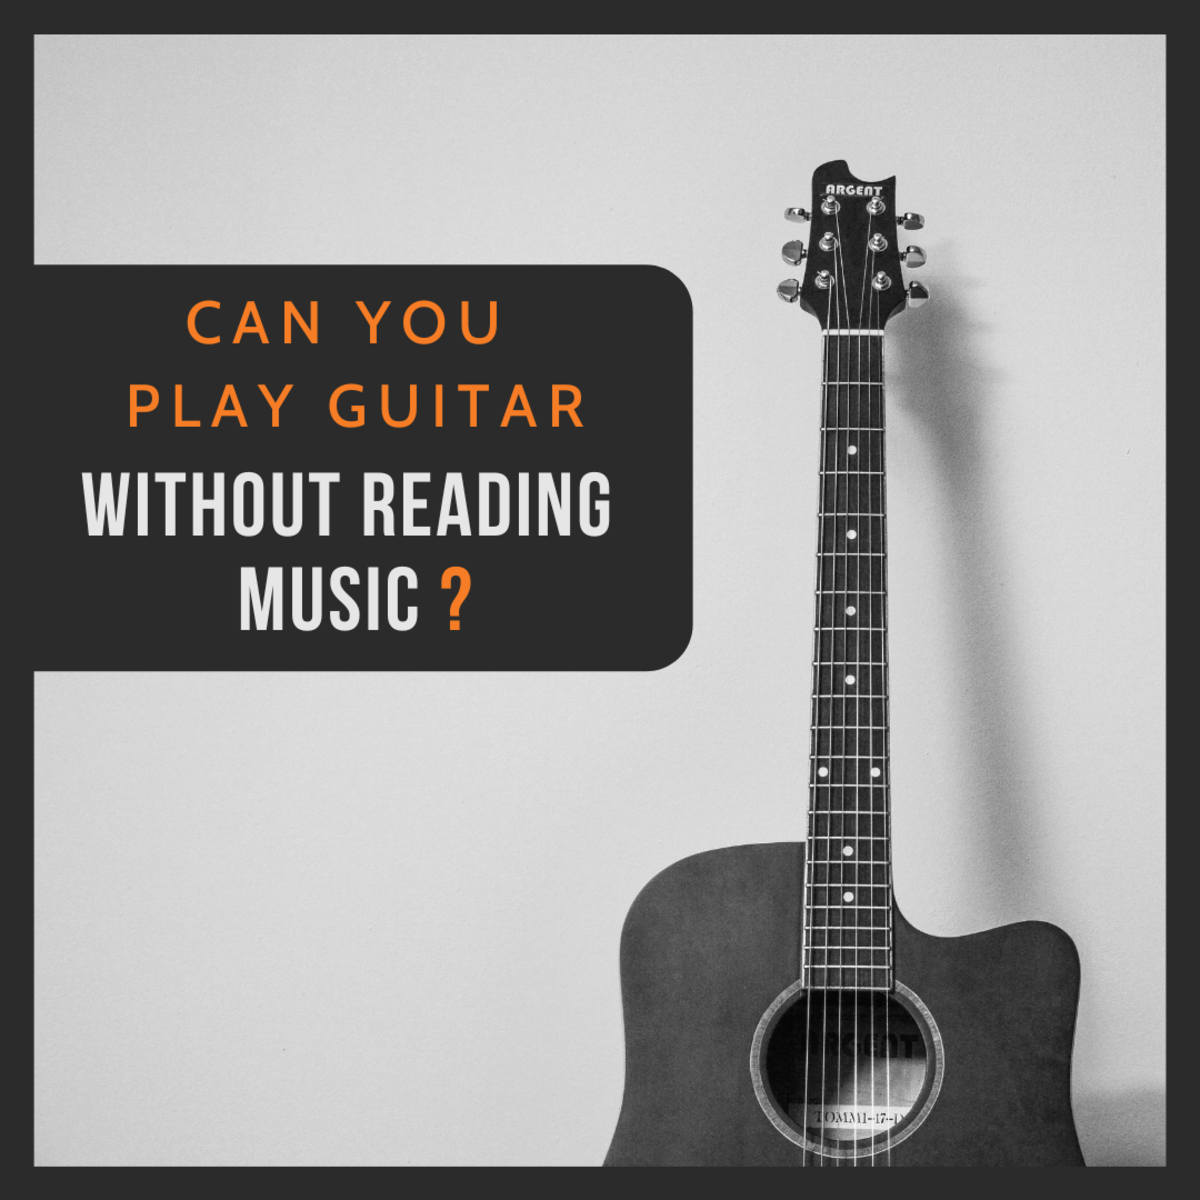 Do you really need to learn to read music if you want to play guitar?